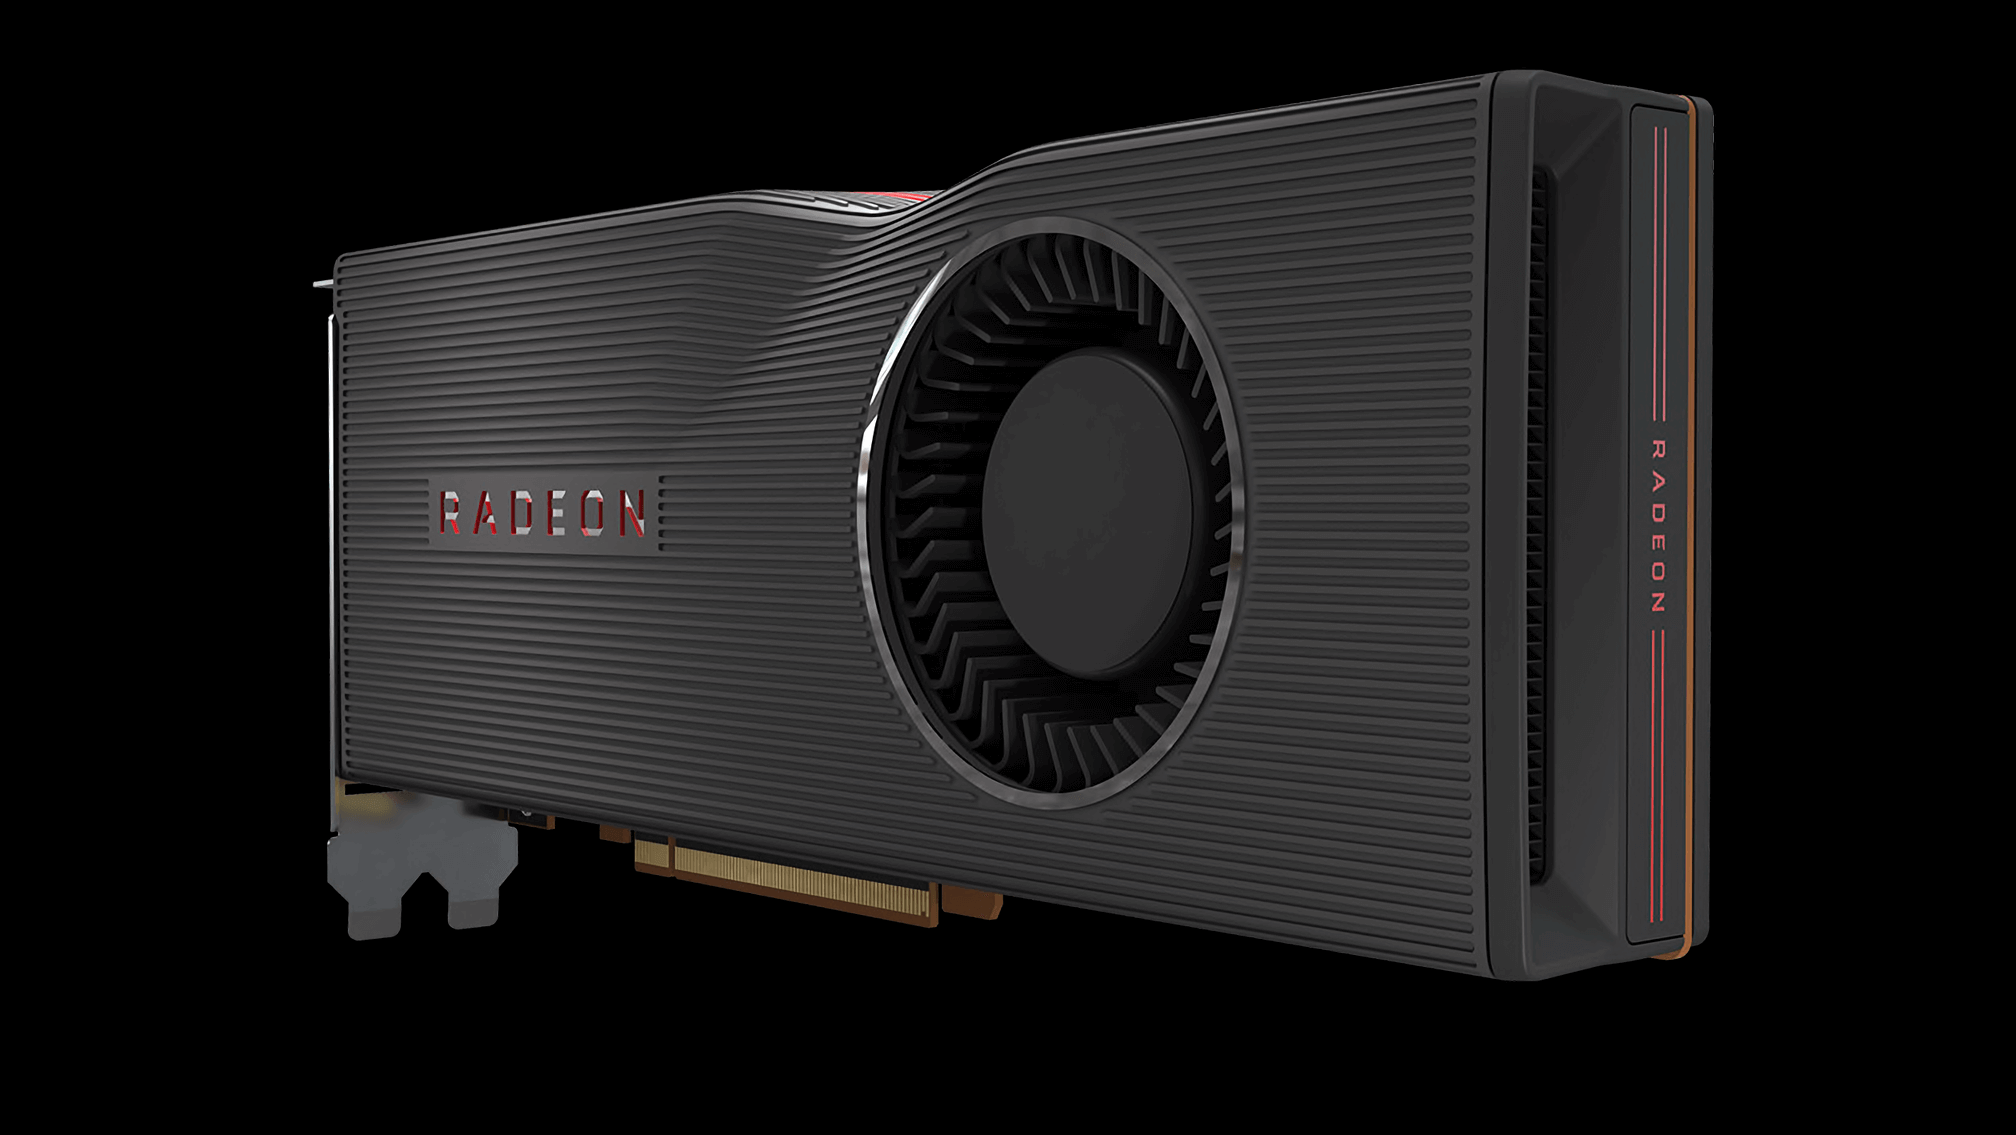 AMD slashes prices of Radeon RX 5700 series ahead of release